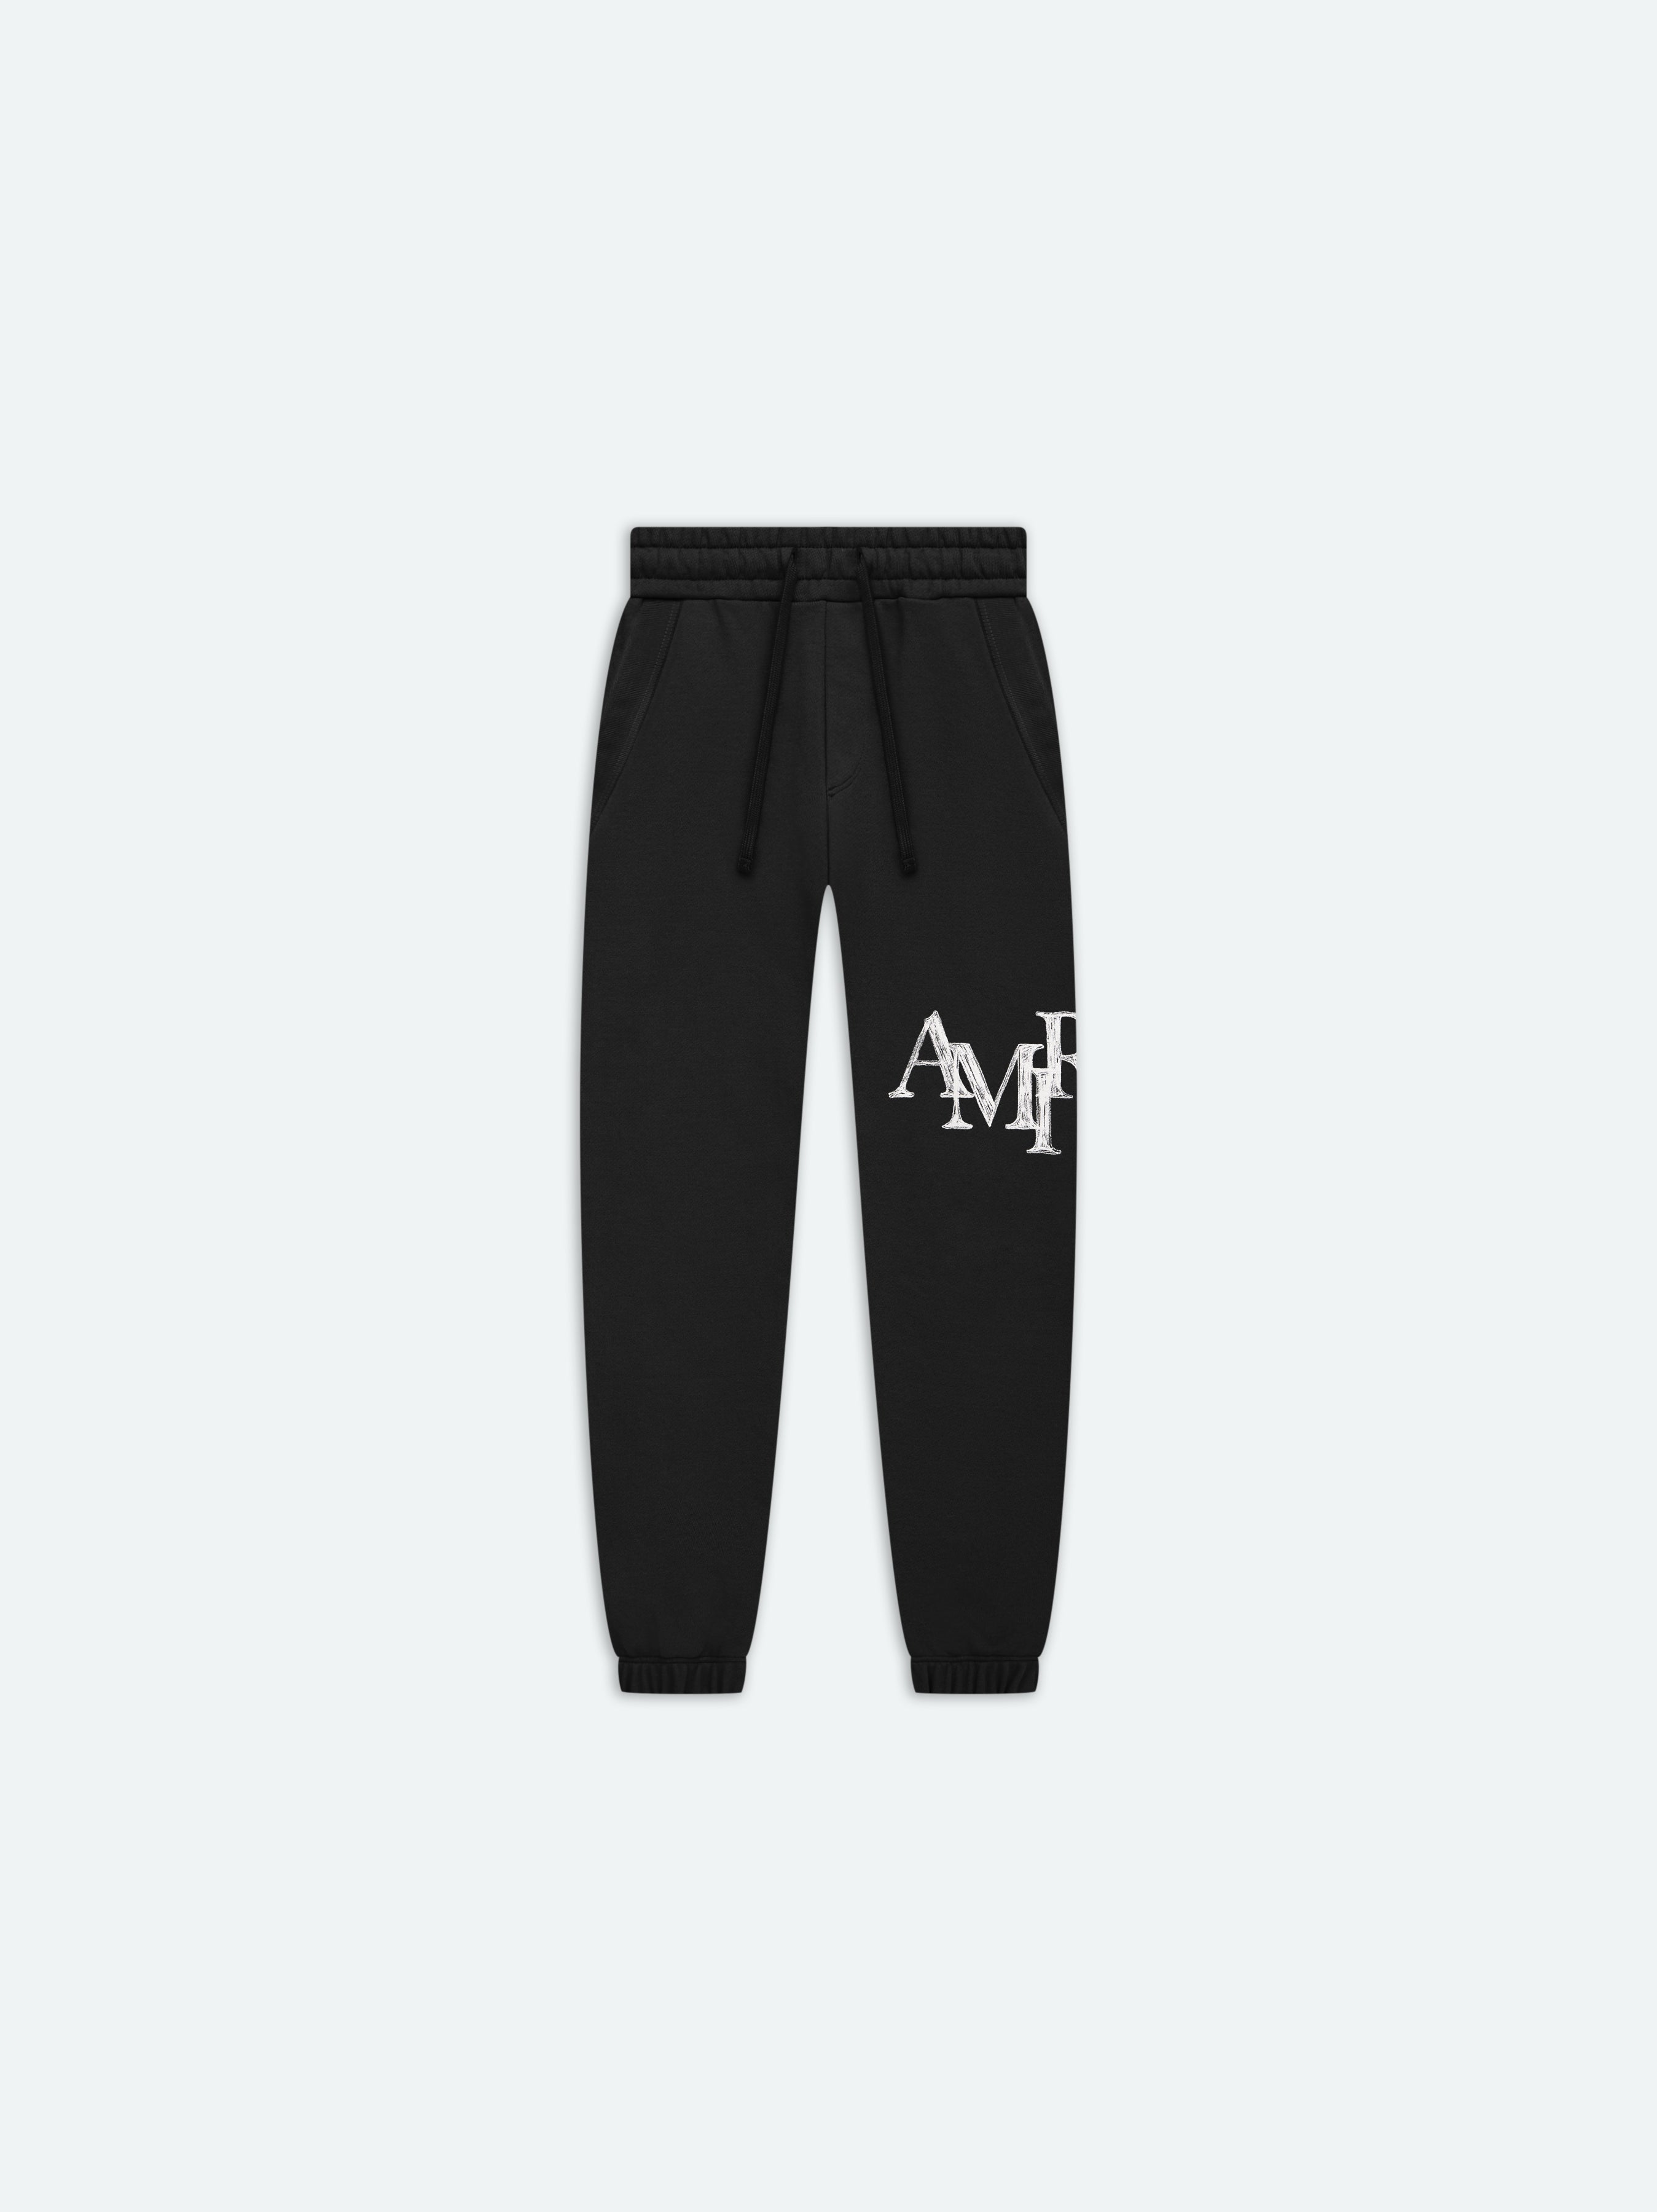 Product KIDS - AMIRI STAGGERED SCRIBBLE SWEATPANT - Black featured image